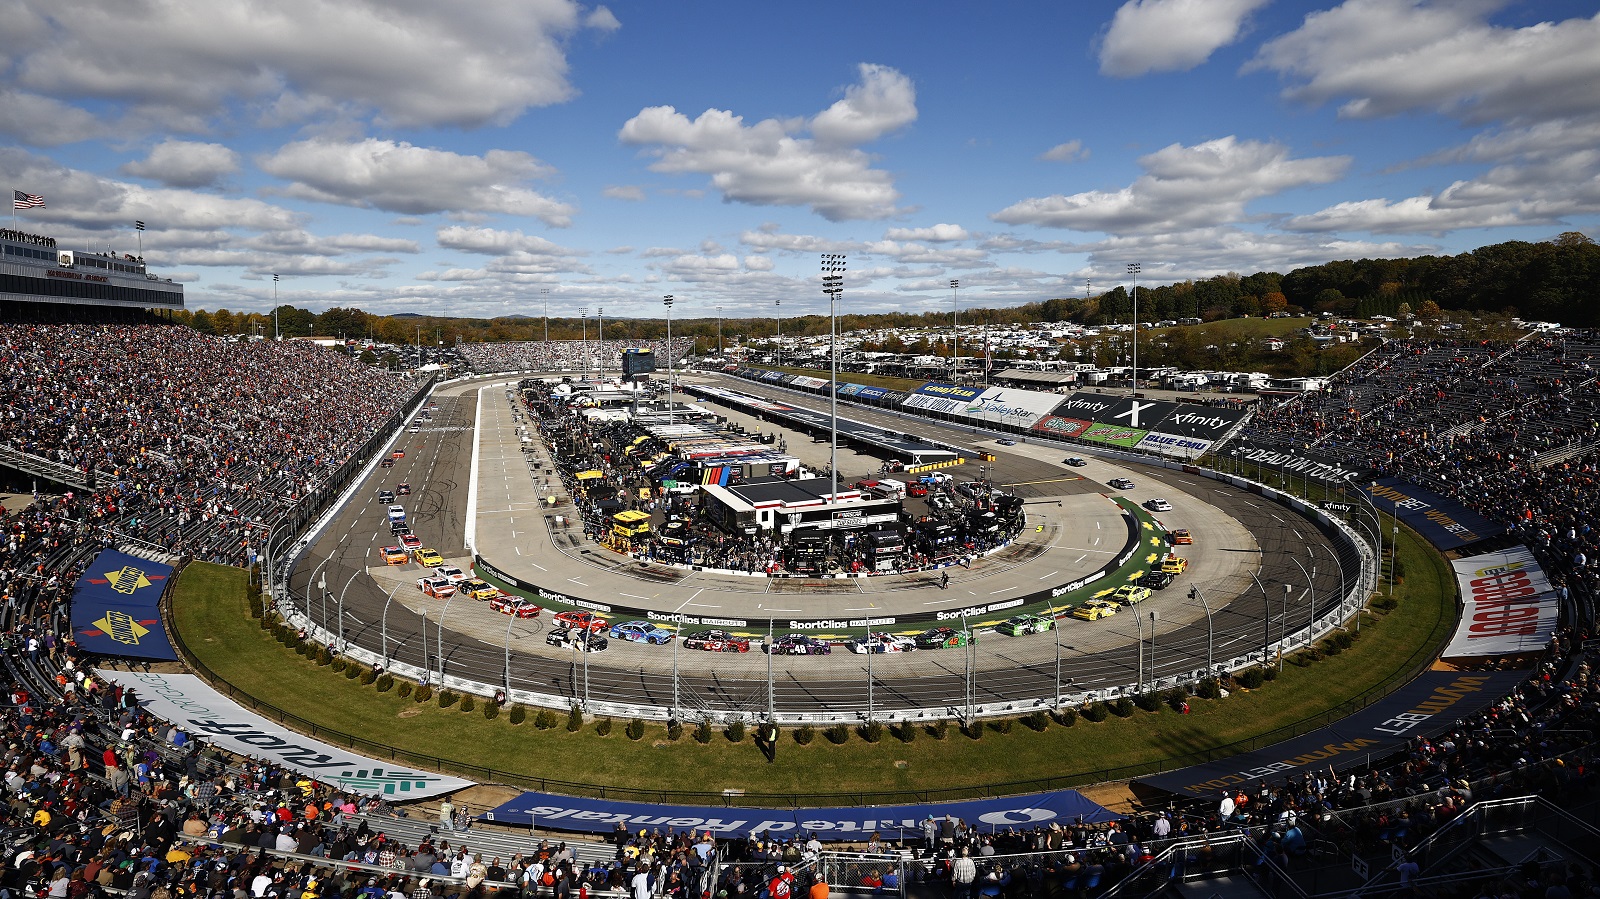 A general view of racing during the NASCAR Cup Series Xfinity 500 at Martinsville Speedway on Oct. 31, 2021, in Martinsville, Virginia.